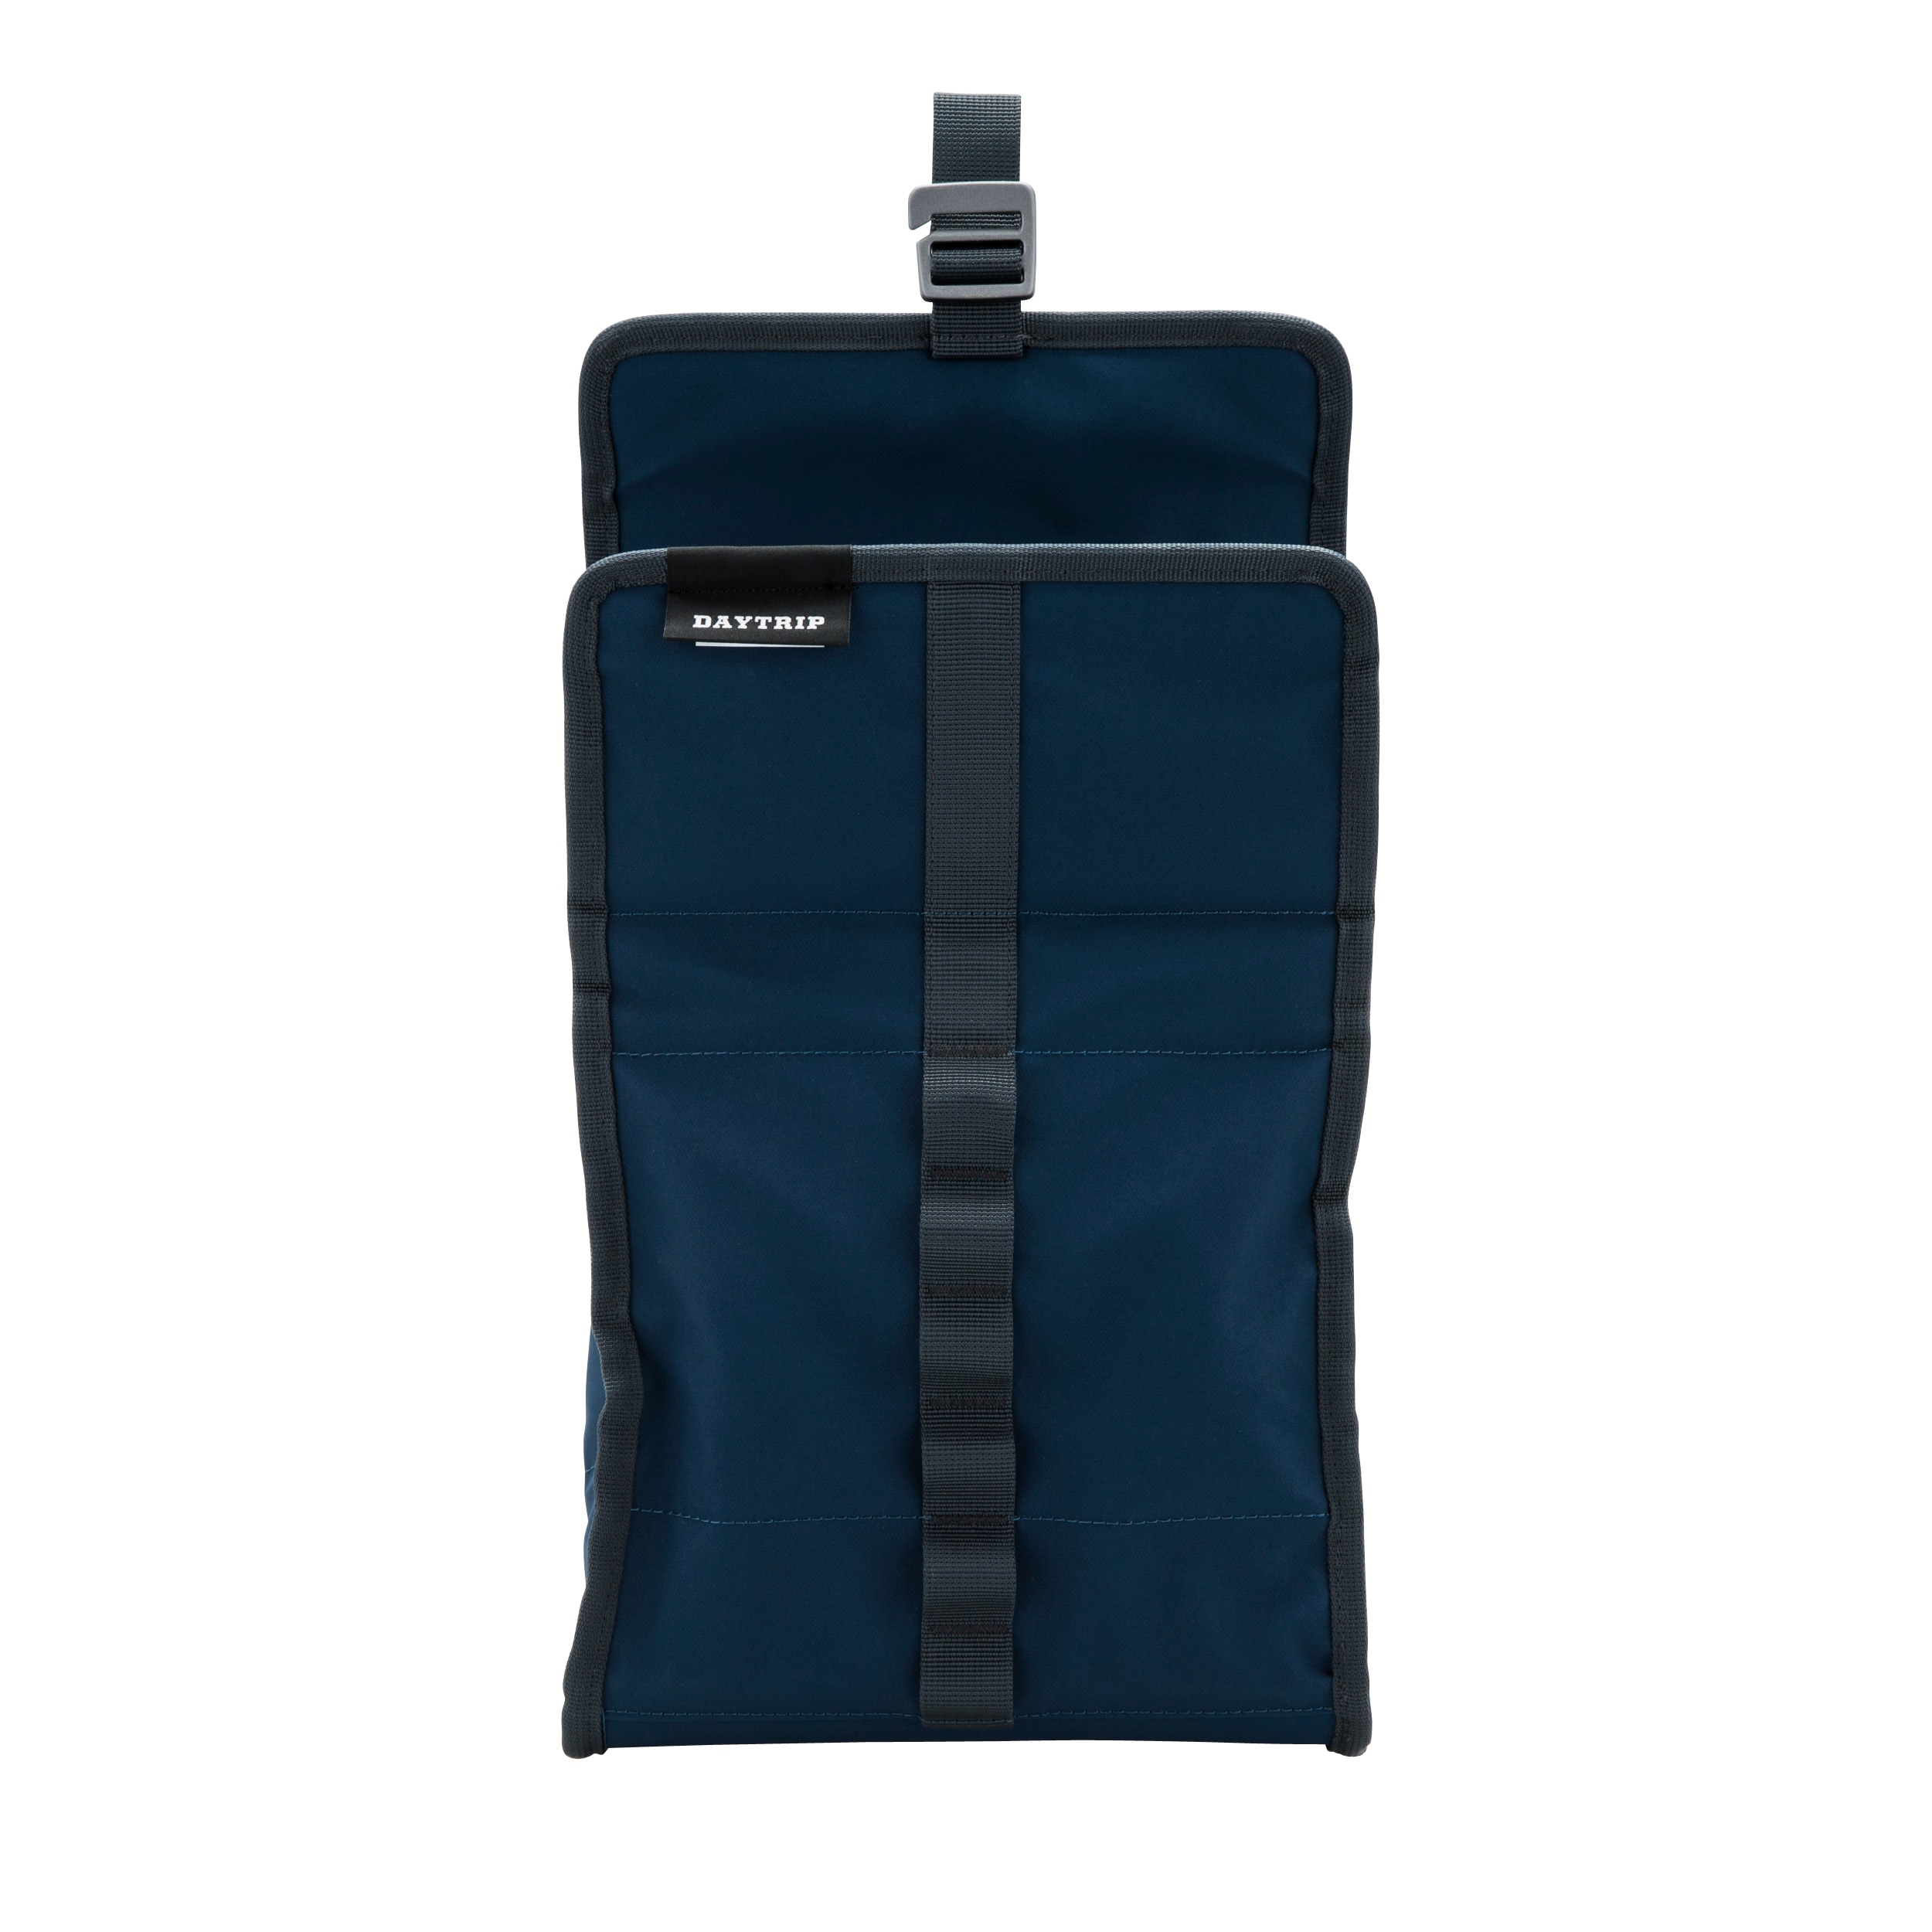 YETI Daytrip Lunch Bag, Navy at Lowes.com